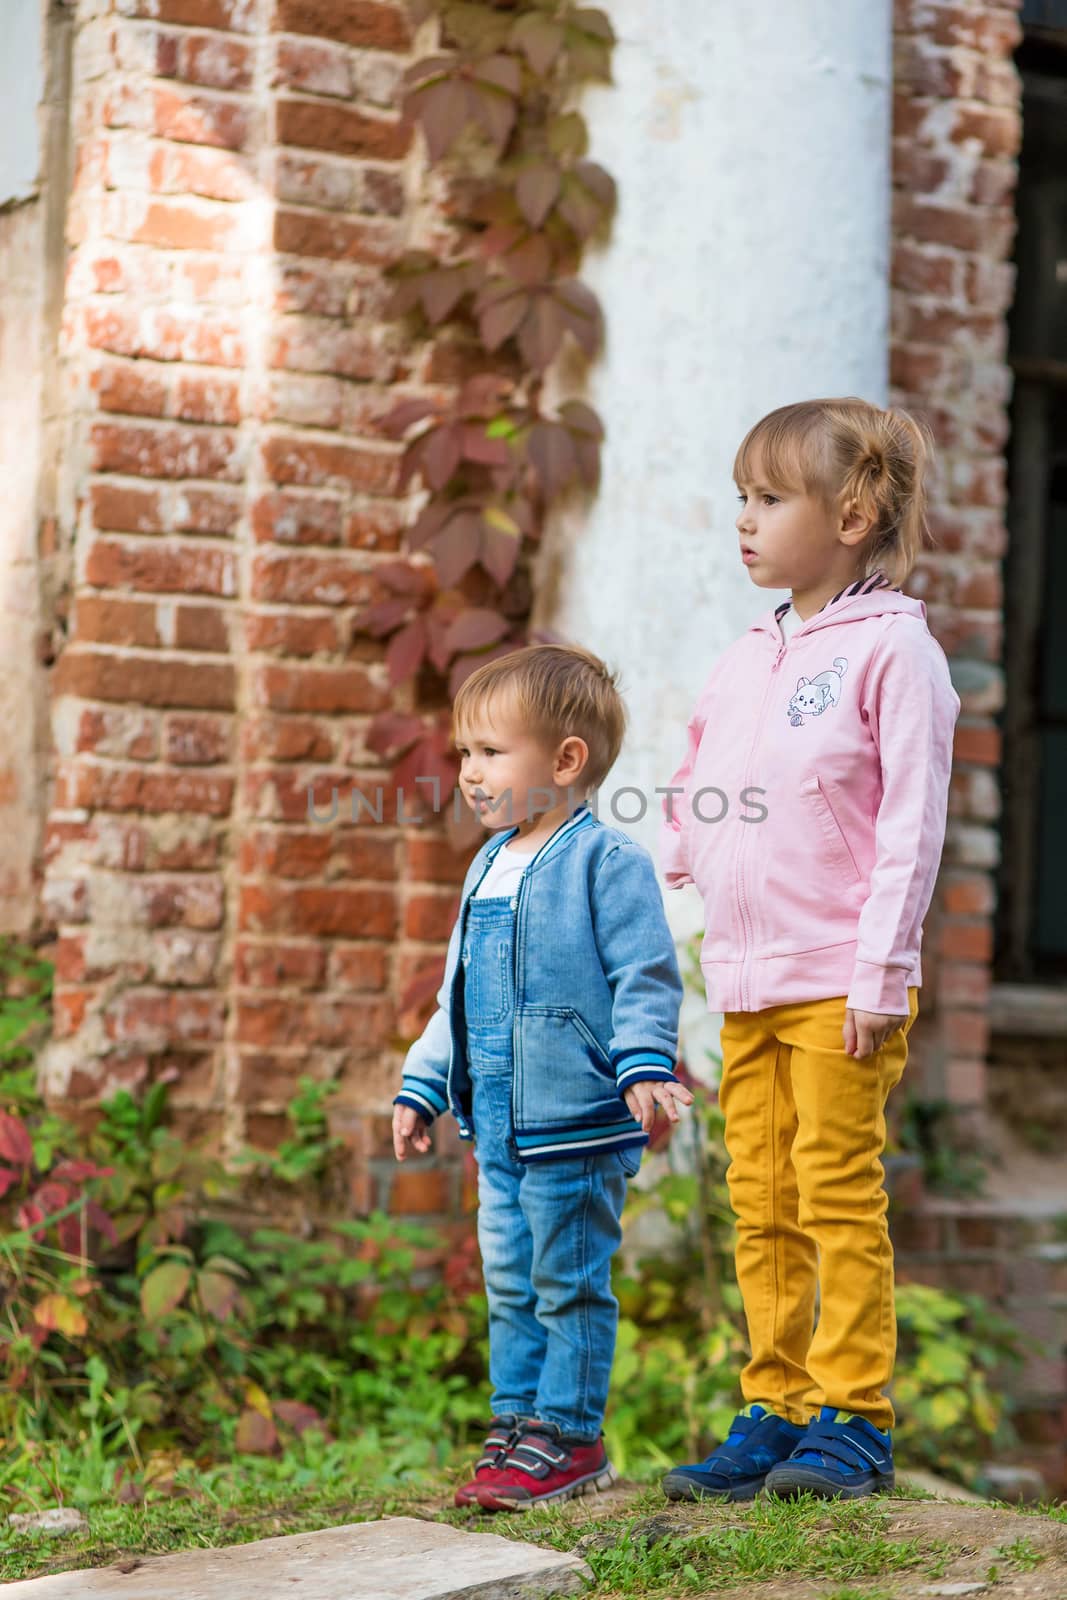 .Children stay near the column in the old park on an autumn walk.